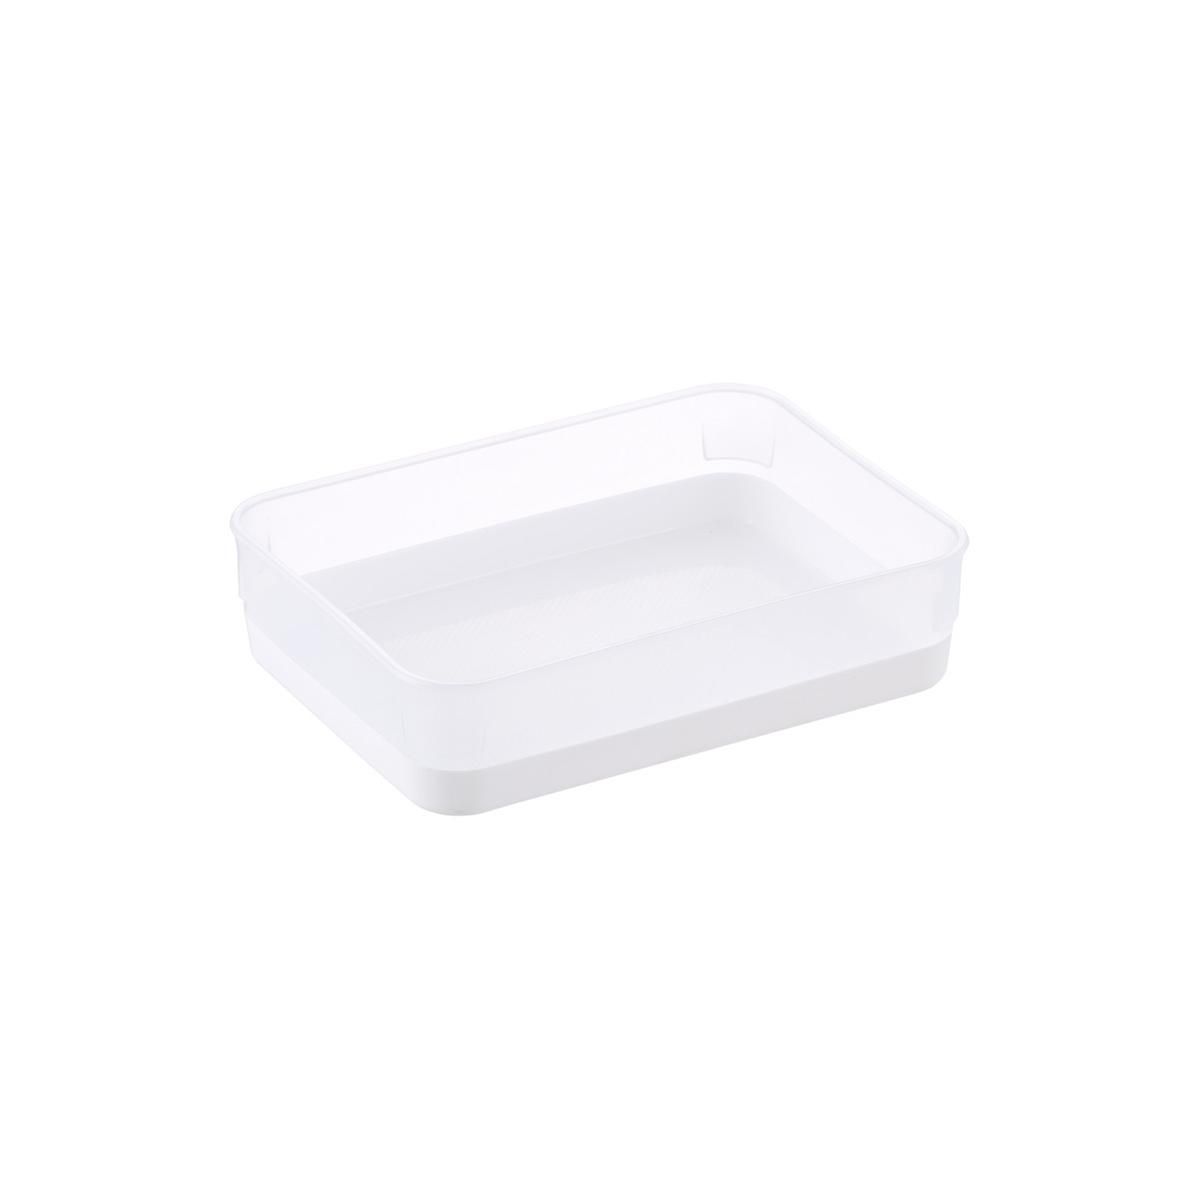 Large Drawer Organizer Tray White | The Container Store